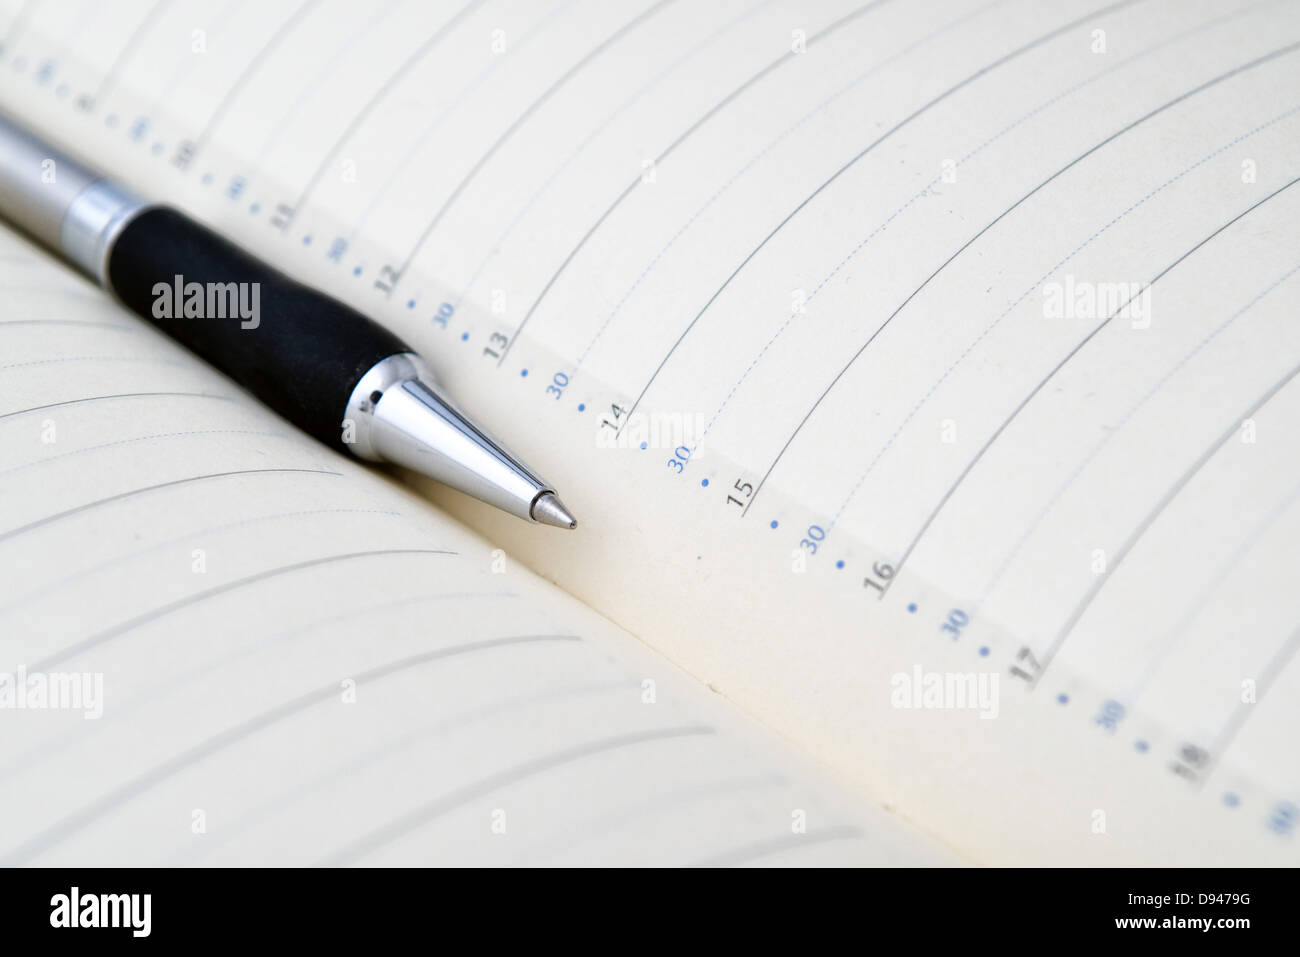 Agenda and pencil, business schedule background image. Stock Photo